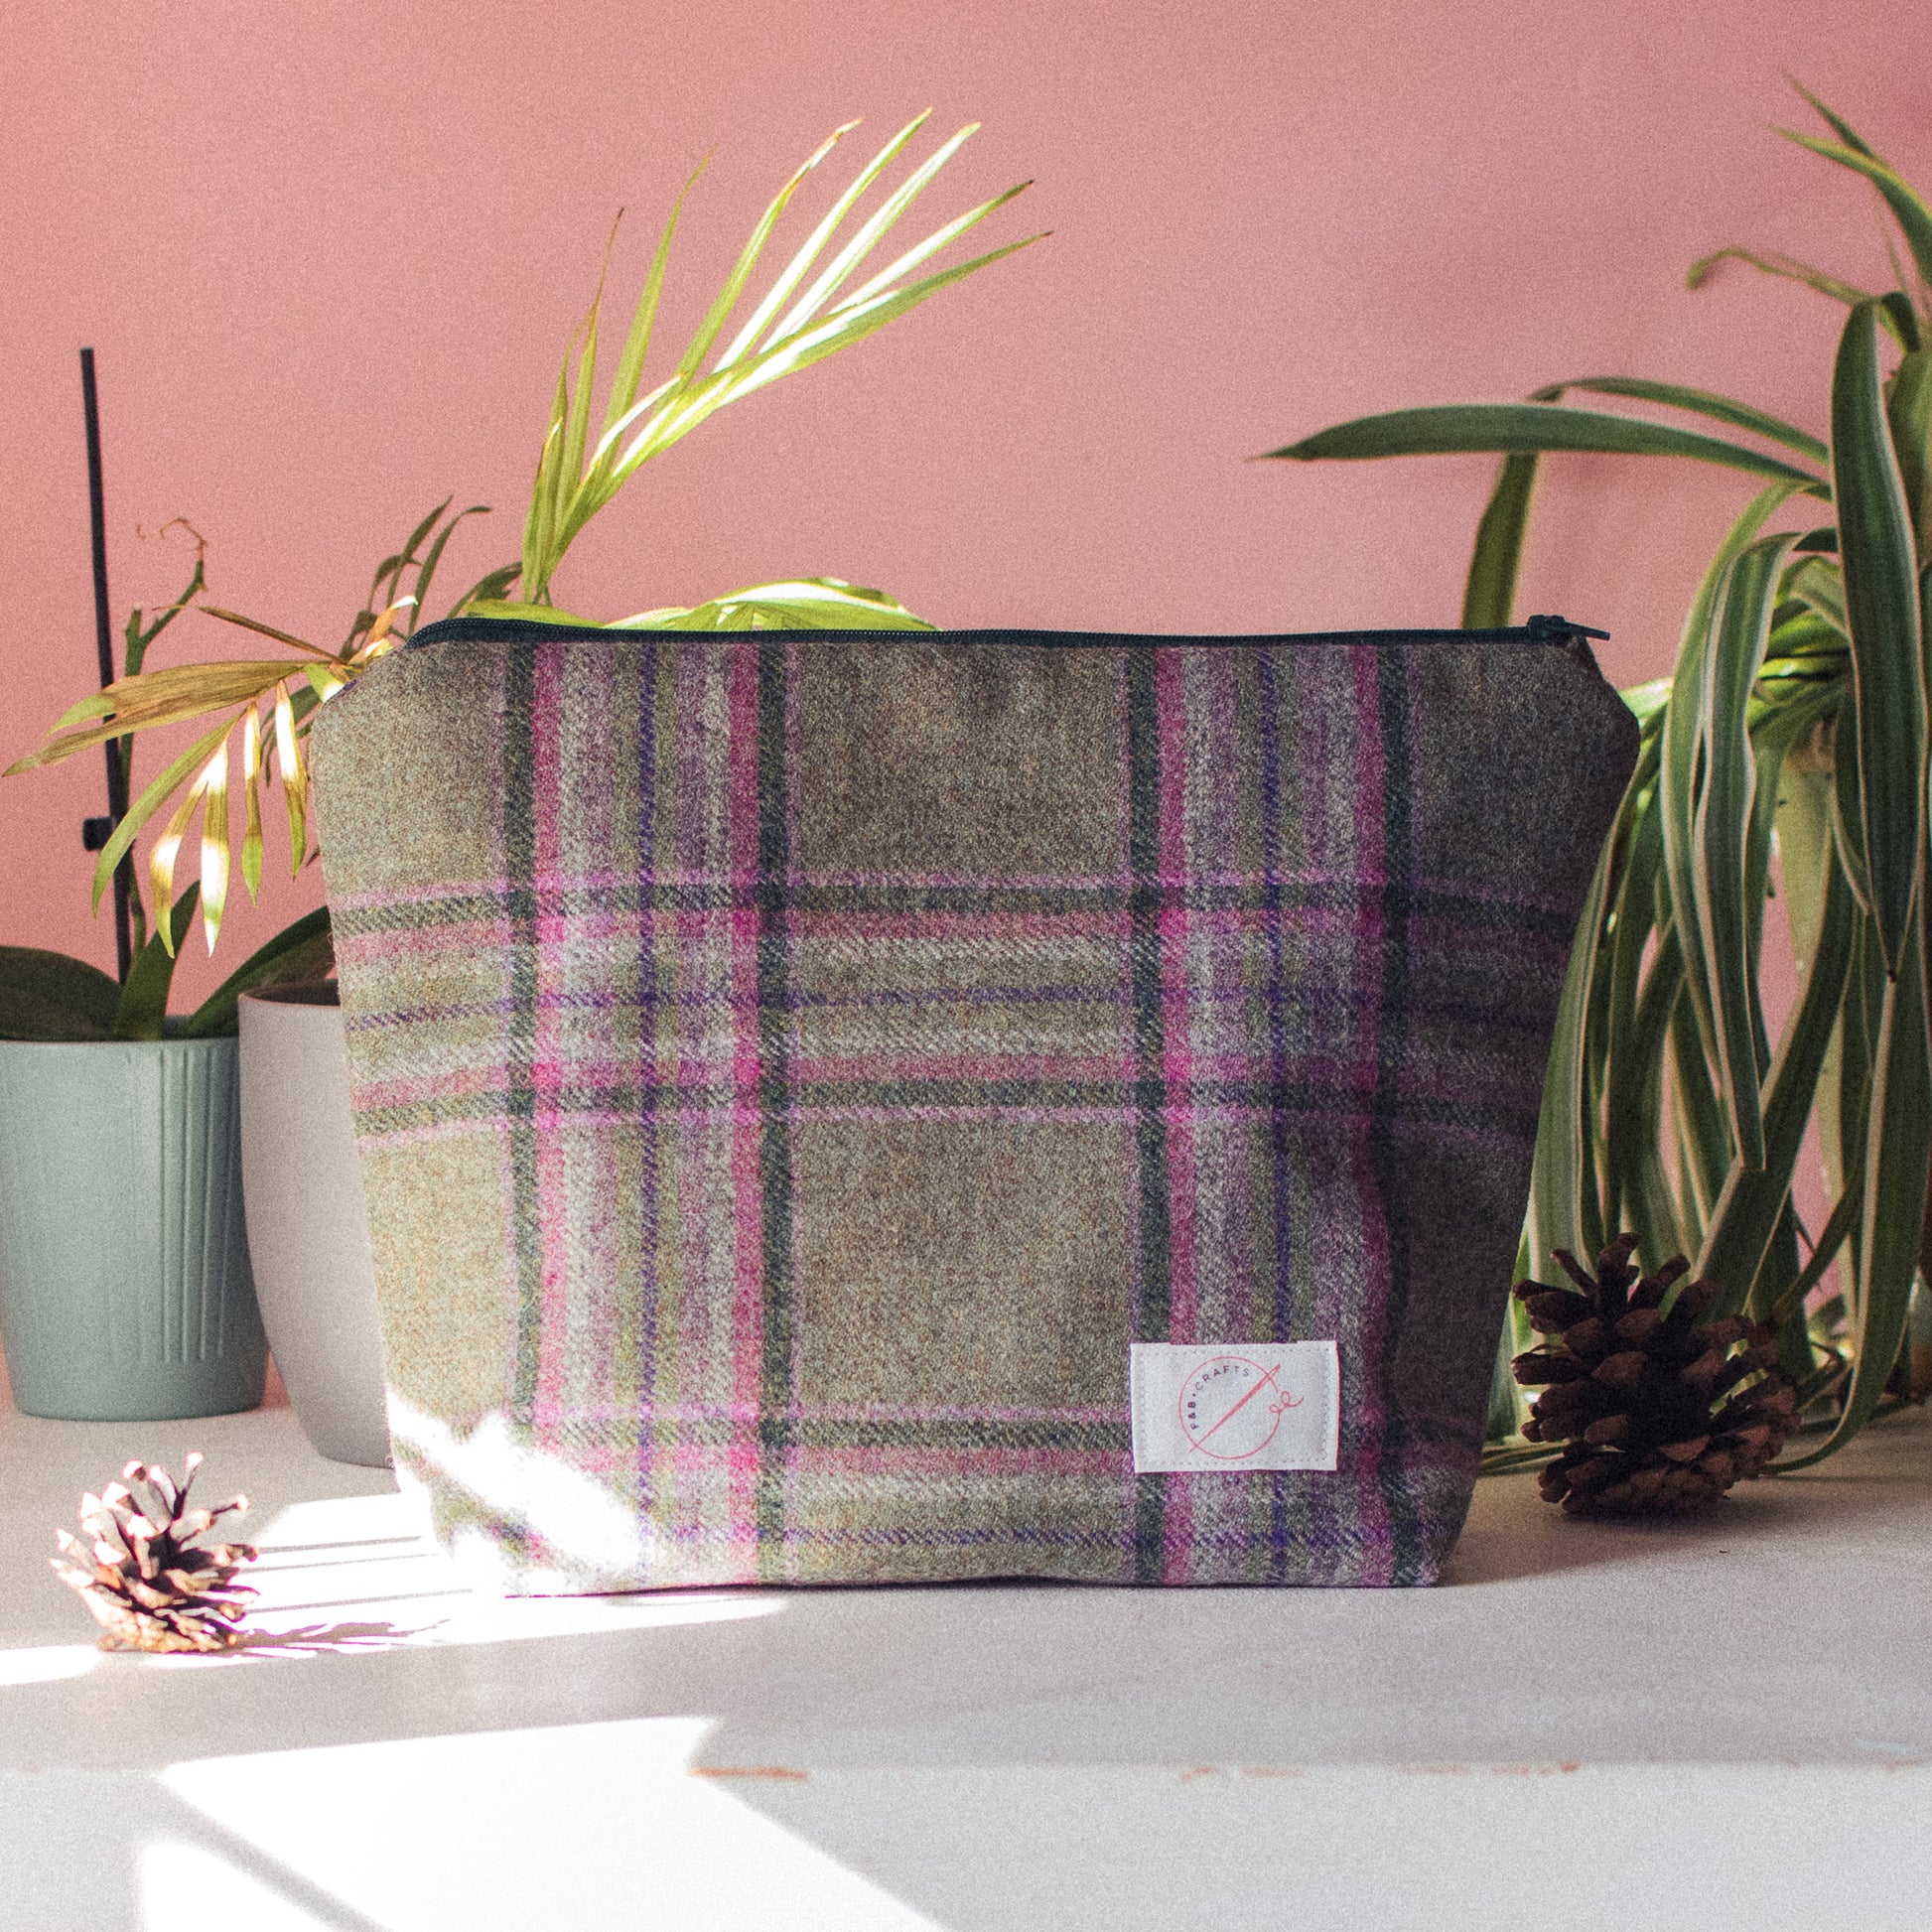 Meadow Tweed Washbag - Grass green tweed with pink, dark green and lilac check pattern by F&B Crafts